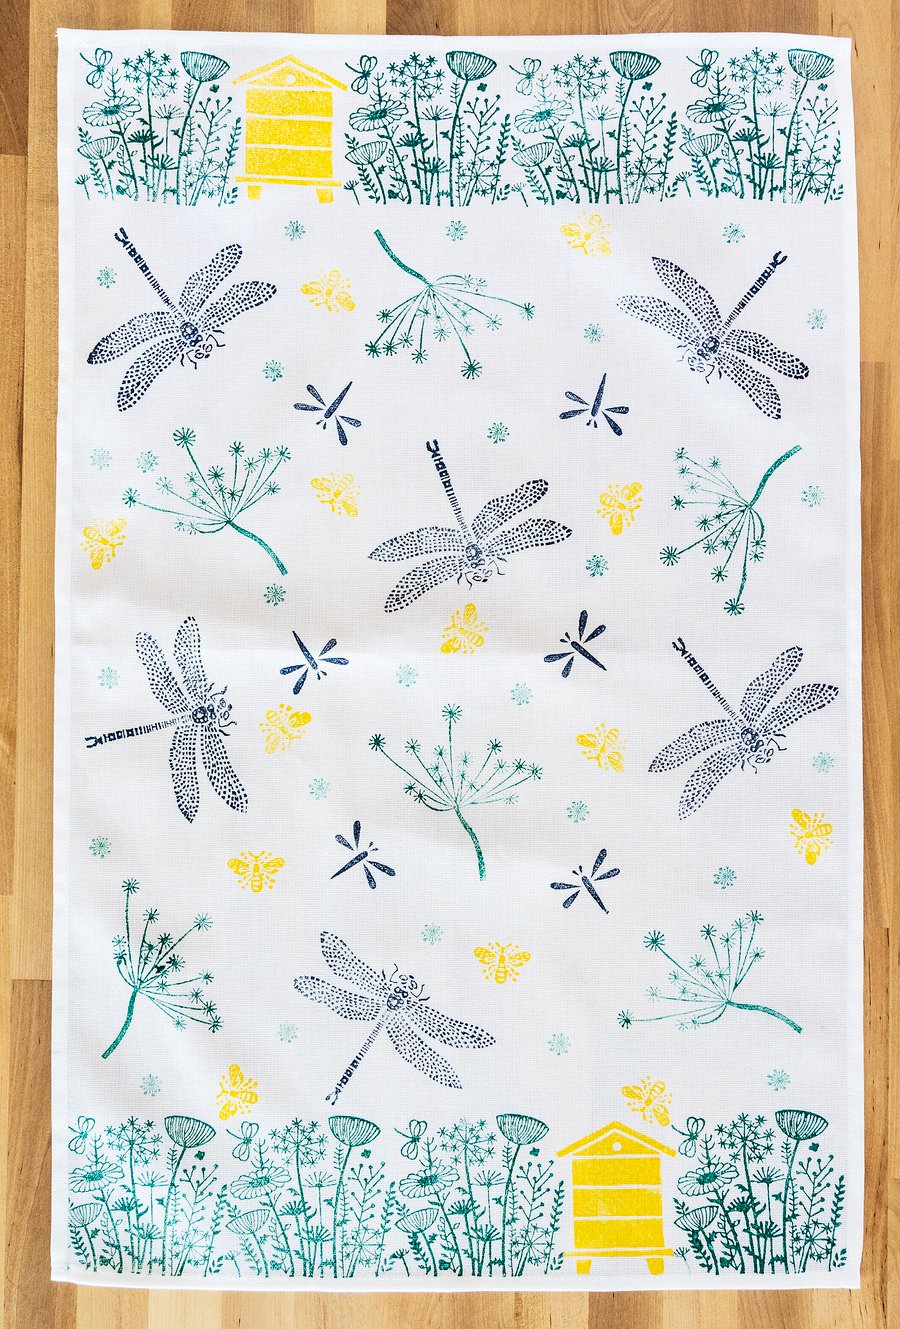 Hand printed dragonflies and bees tea towel housewarming, nature lover gifts  